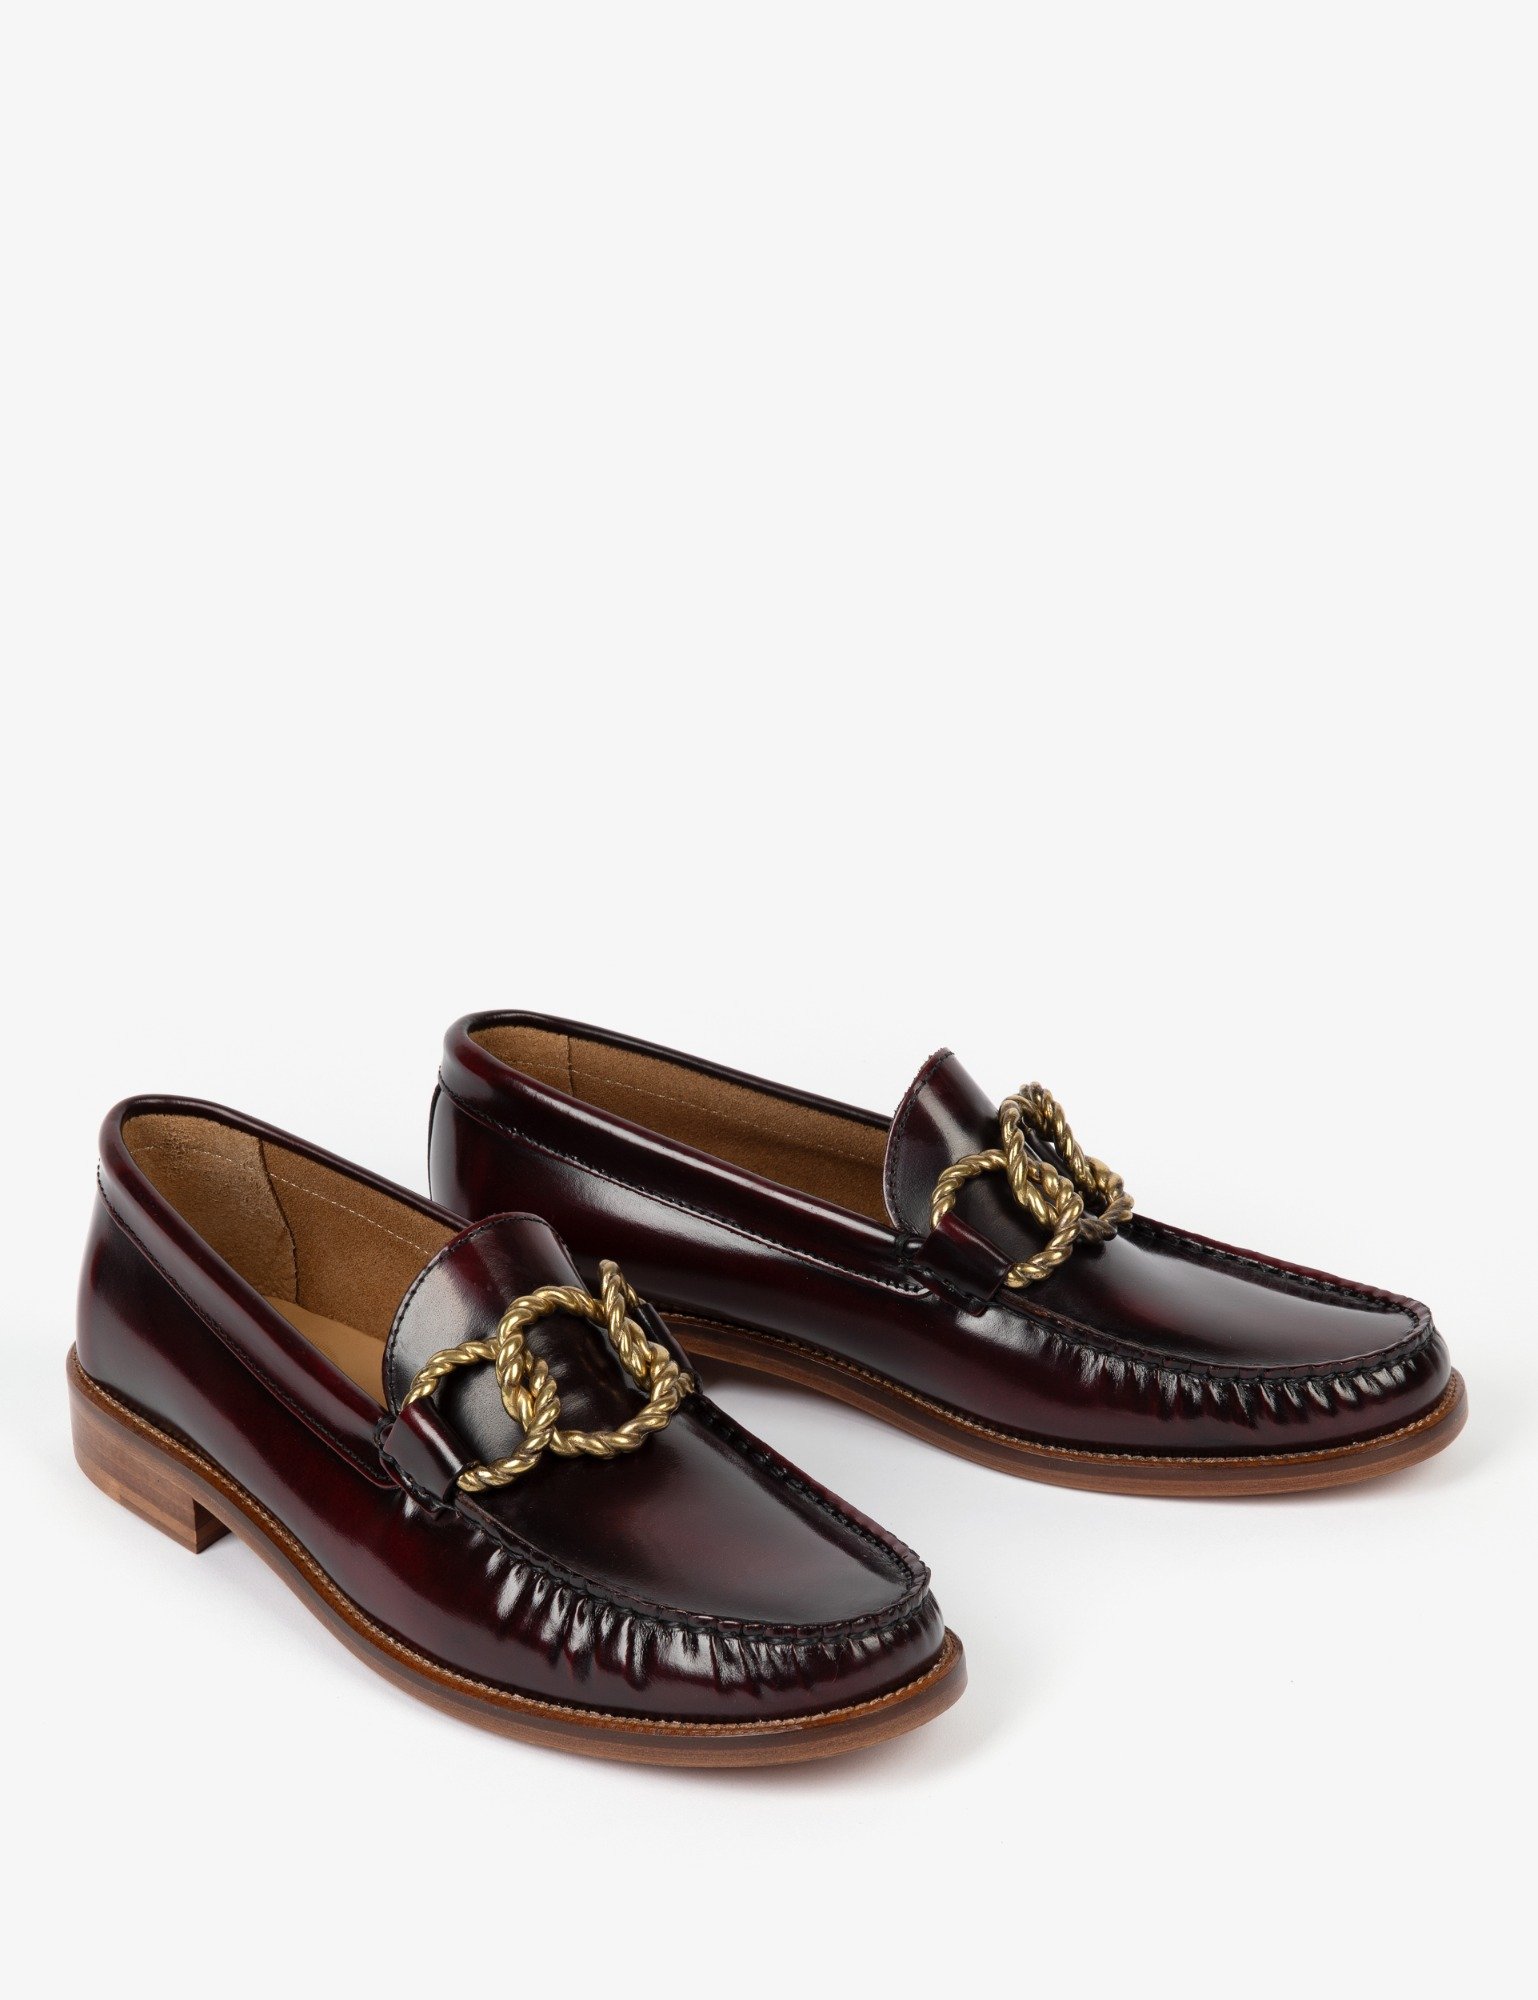 Braided Barley Florentic Loafer -Bordeaux | Women Shoes |Penelope Chilvers